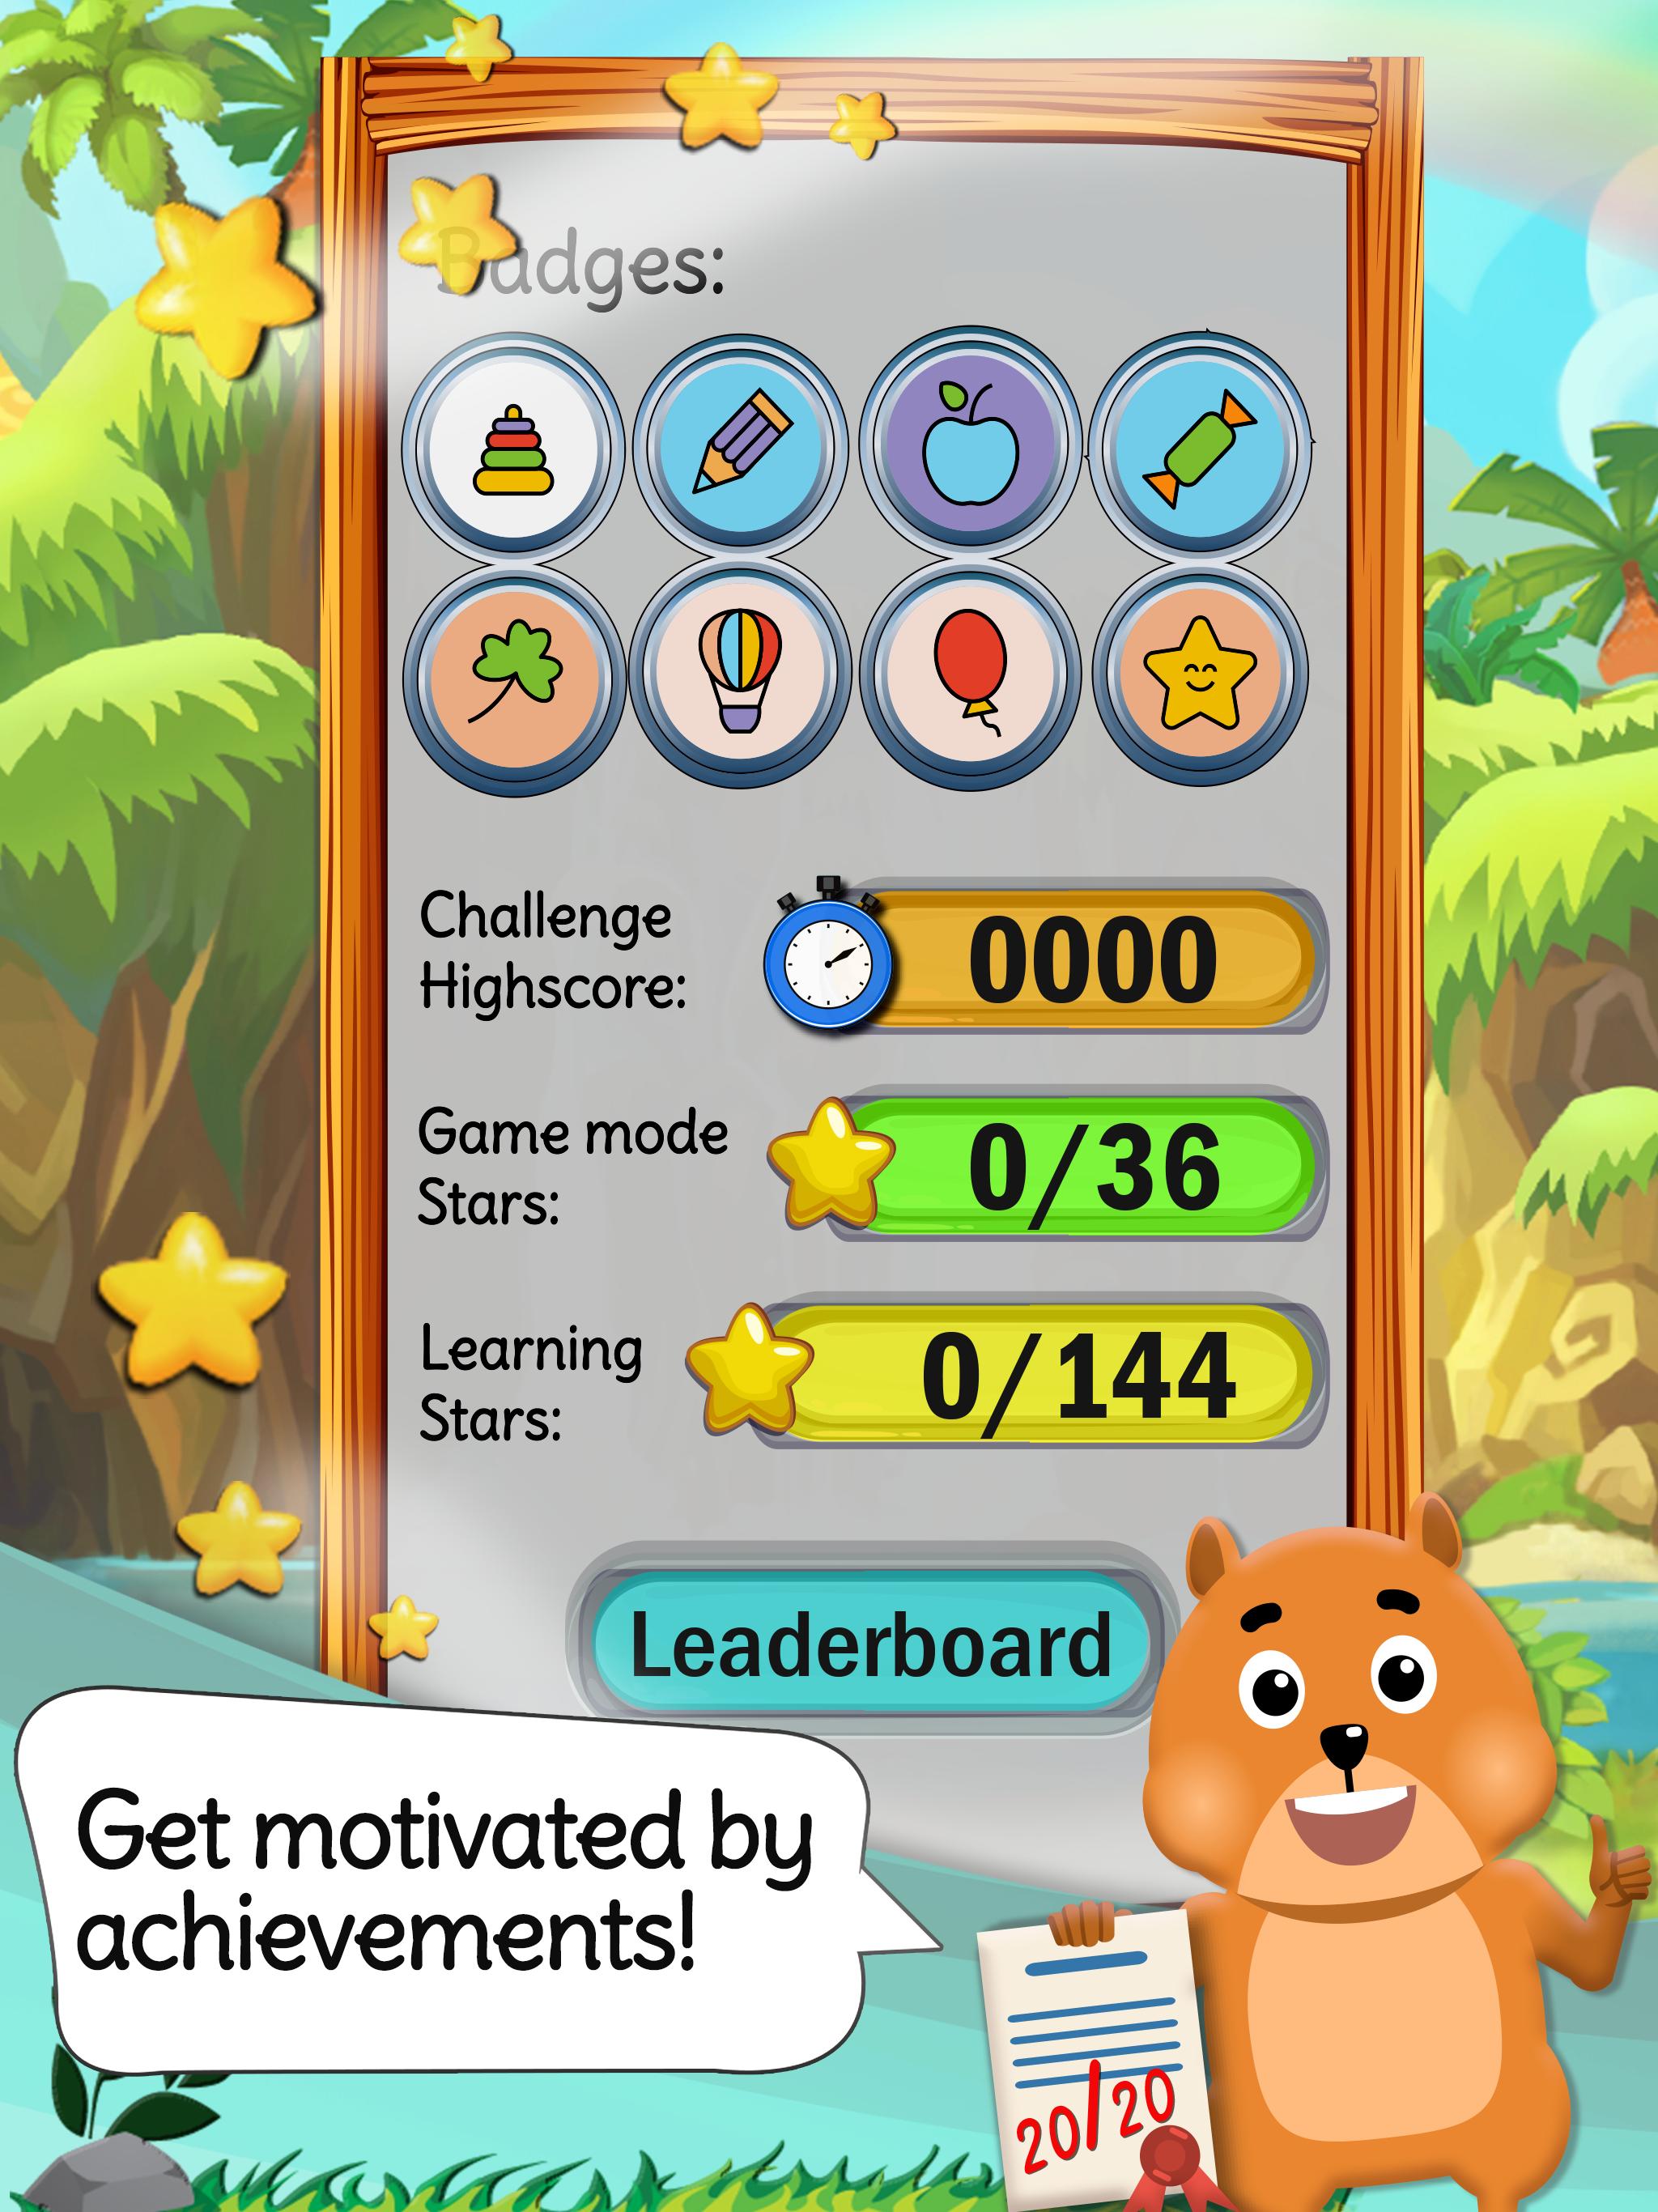 Times Tables & Friends: Free Multiplication Games 2.3.77 Screenshot 14